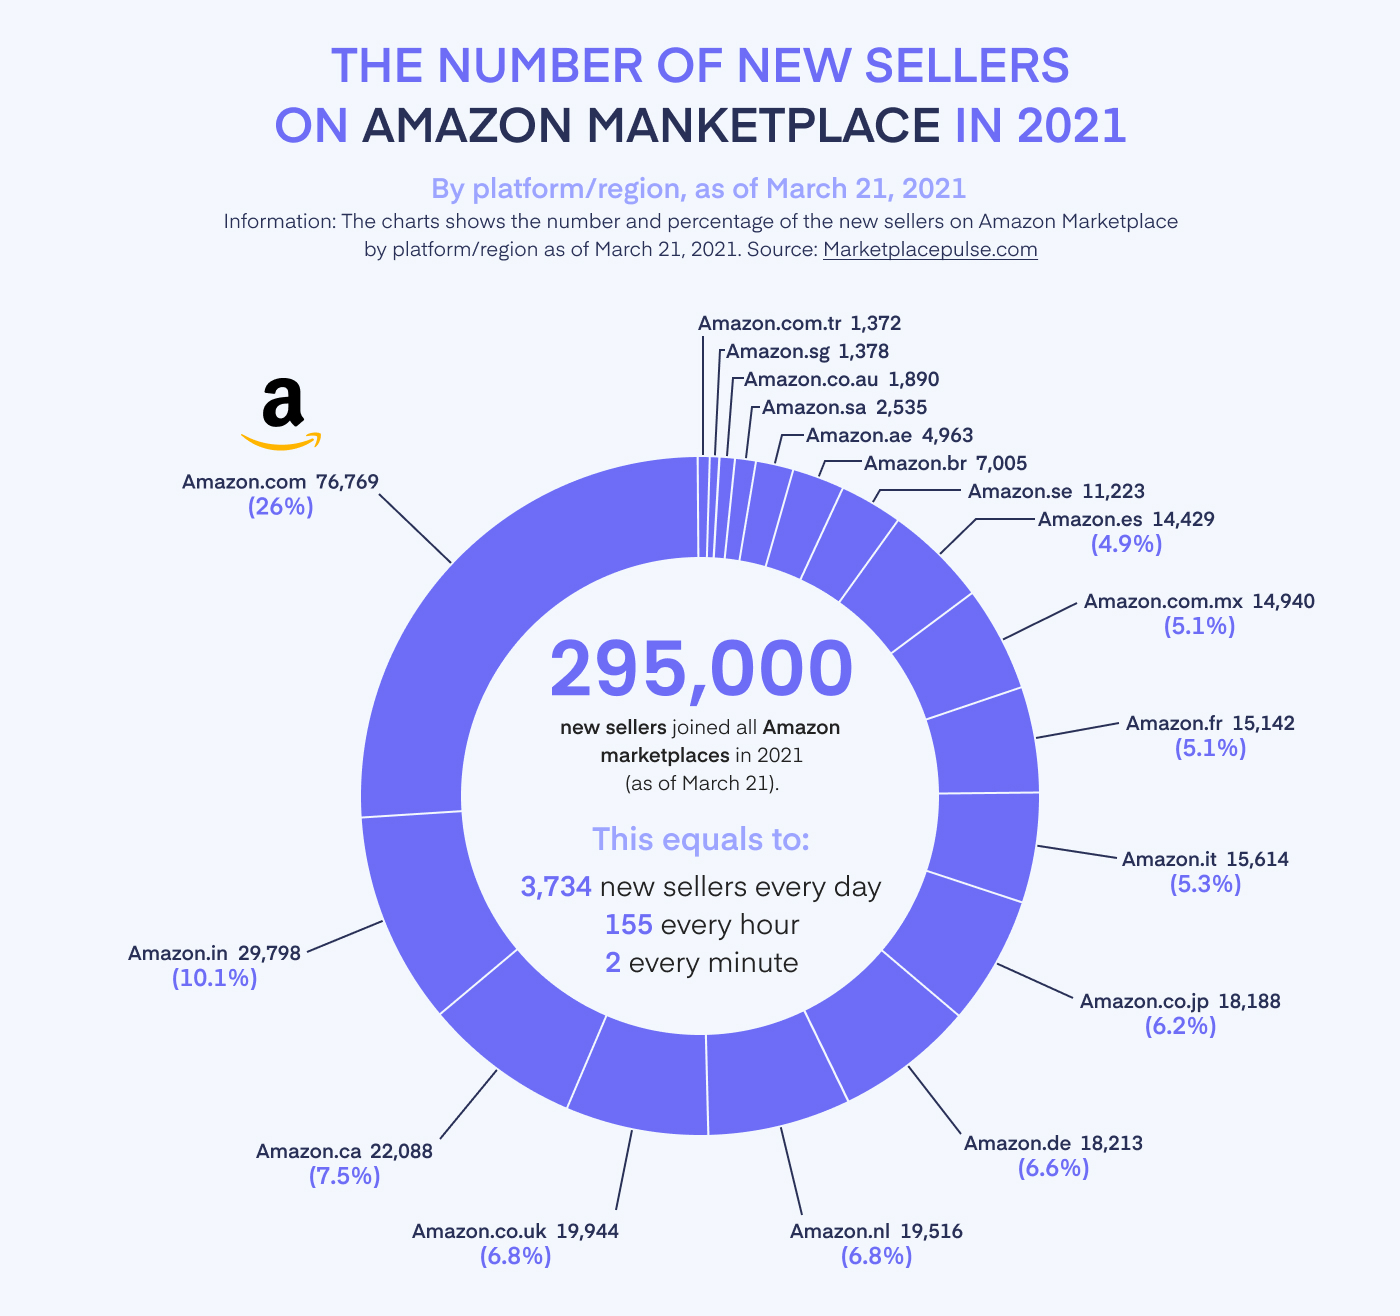 The Number of New Sellers on Amazon Marketplace in 2021